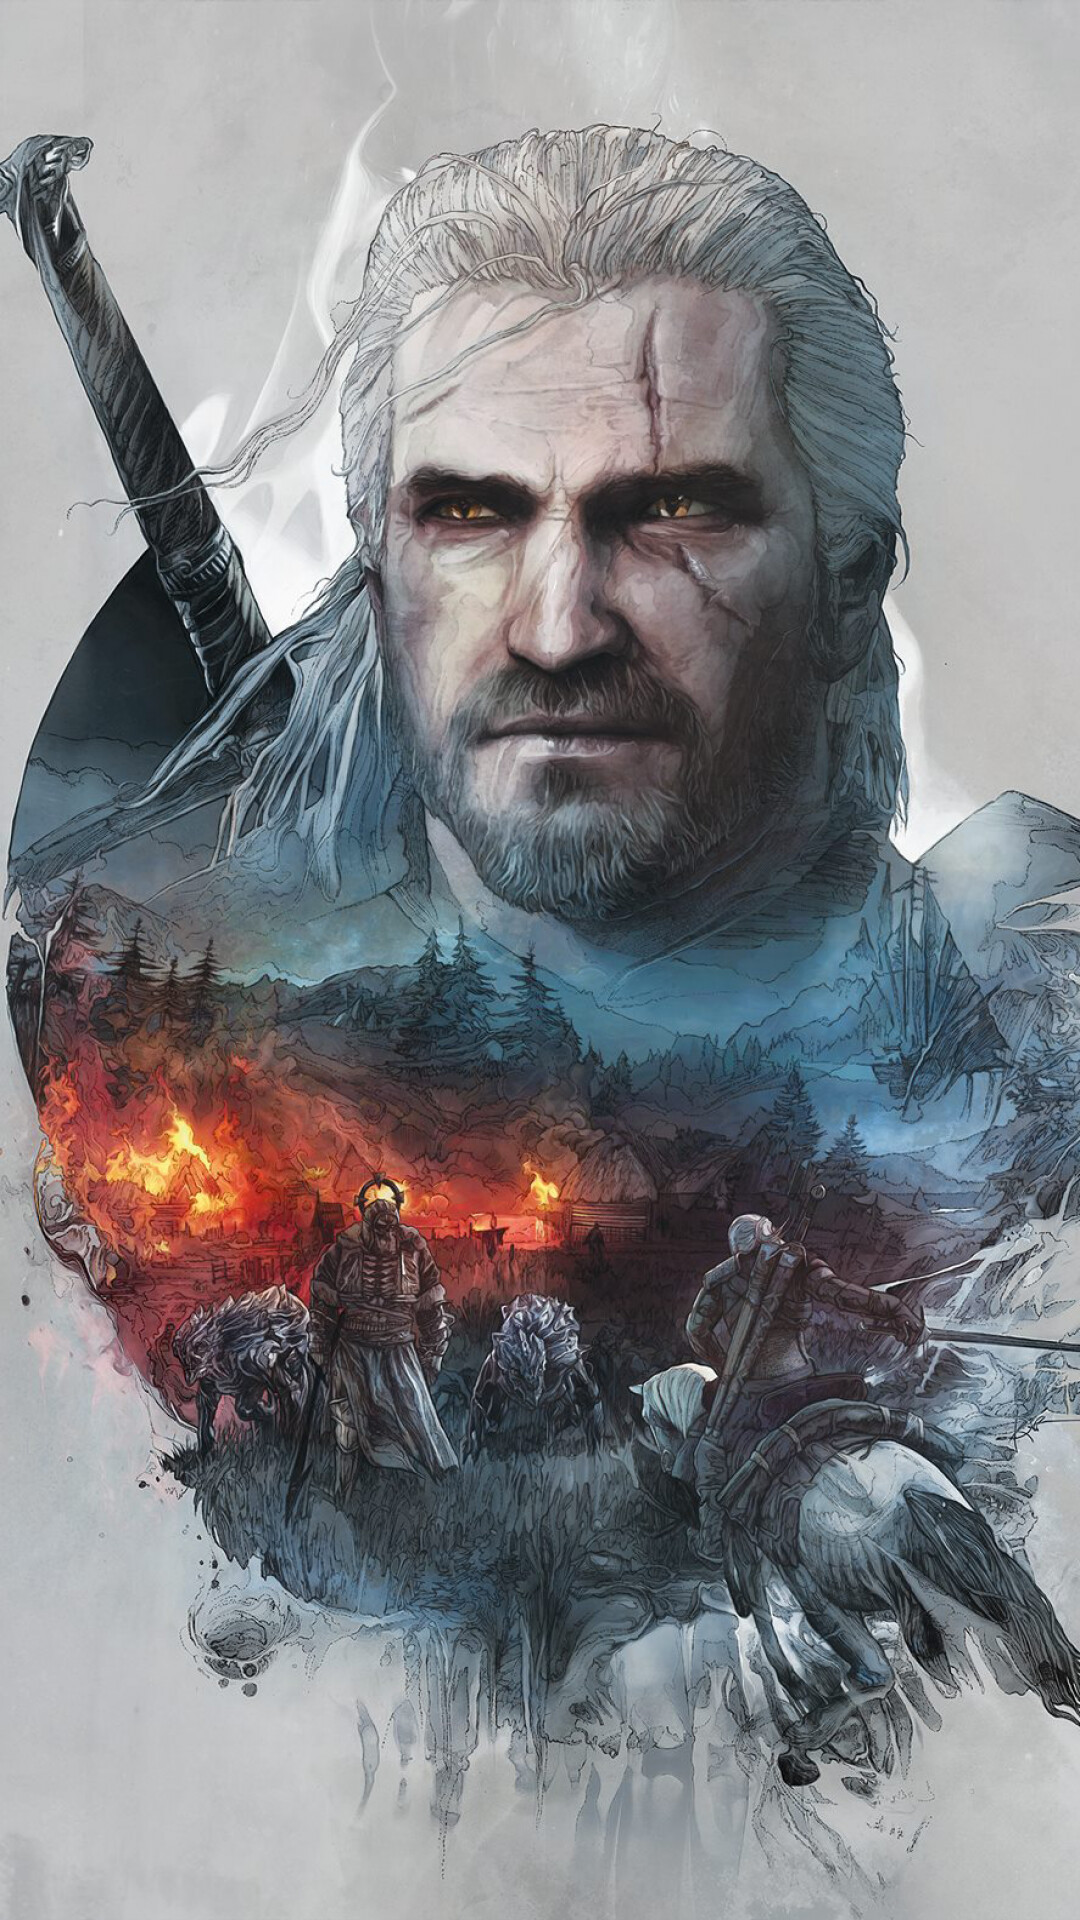 The Witcher (Game): A mutated monster-hunter for hire, journeys toward his destiny in a turbulent world. 1080x1920 Full HD Background.